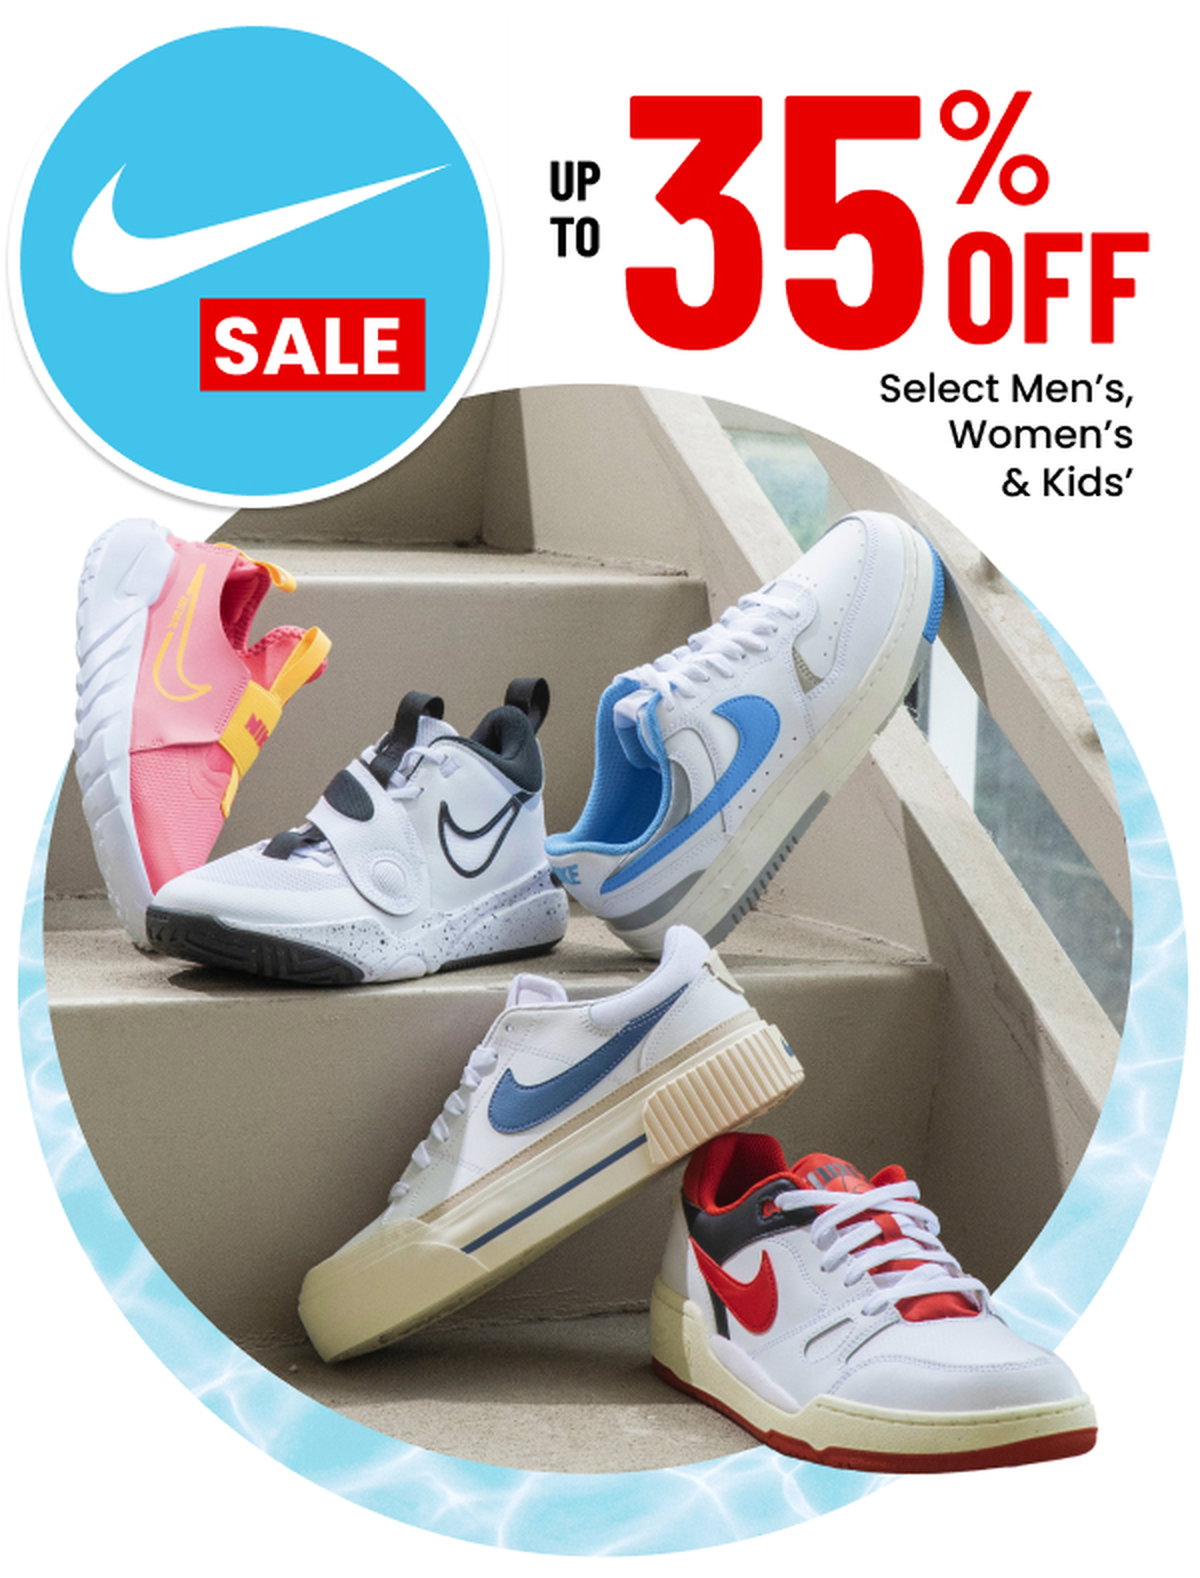 Nike On Sale up to 35% off - Select Men's Women's and Kids